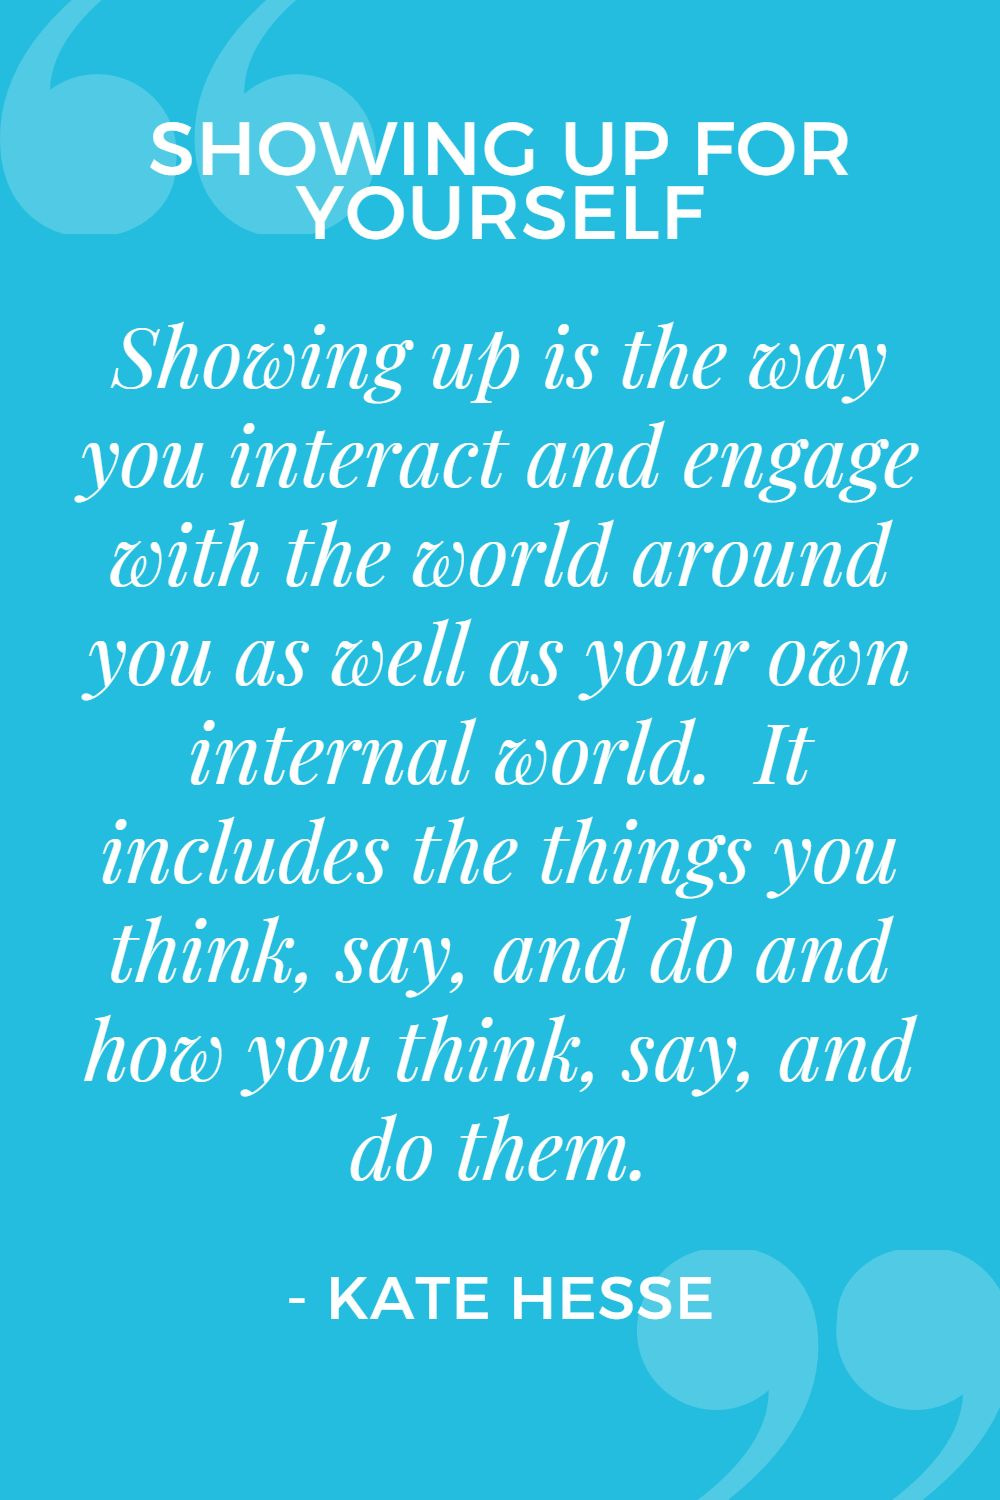 Showing up is the way you interact and engage with the world around you as well as your own internal world. It includes the things you think, say, and do and how you think, say, and do them.